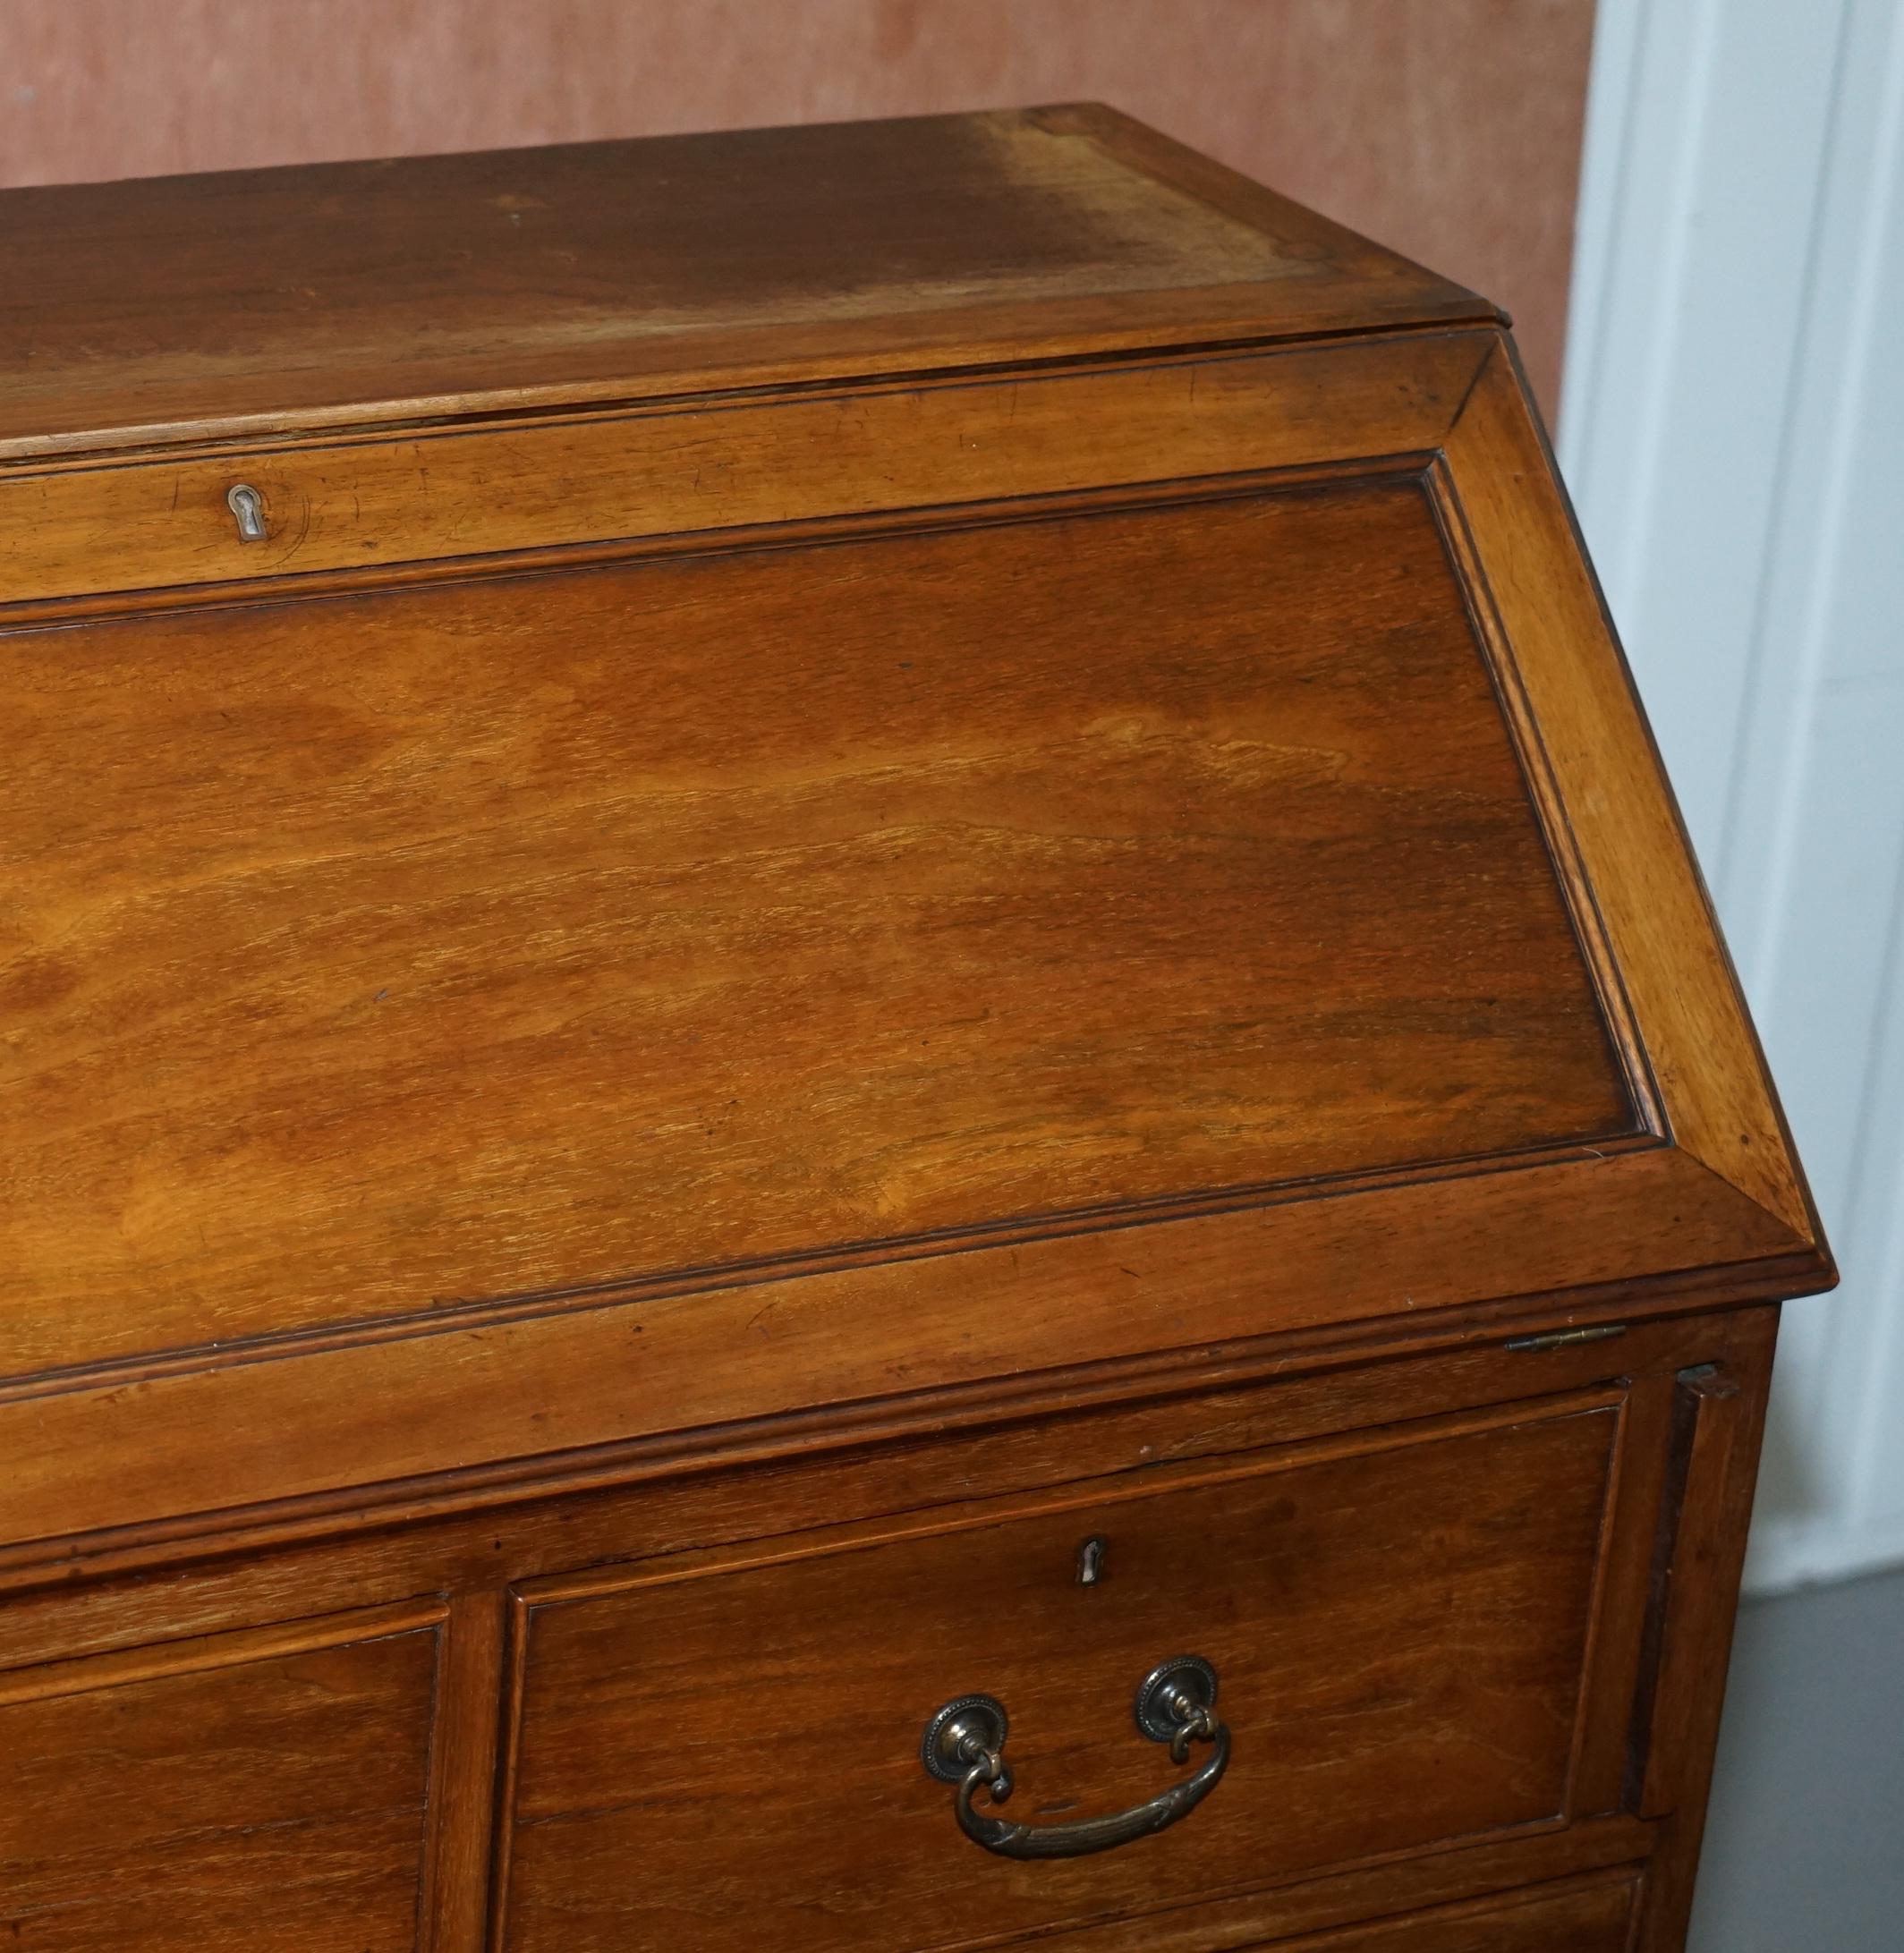 Hand-Crafted Lovely circa 1900 Solid Walnut Writing Bureau Chest of Drawers with Desk Top